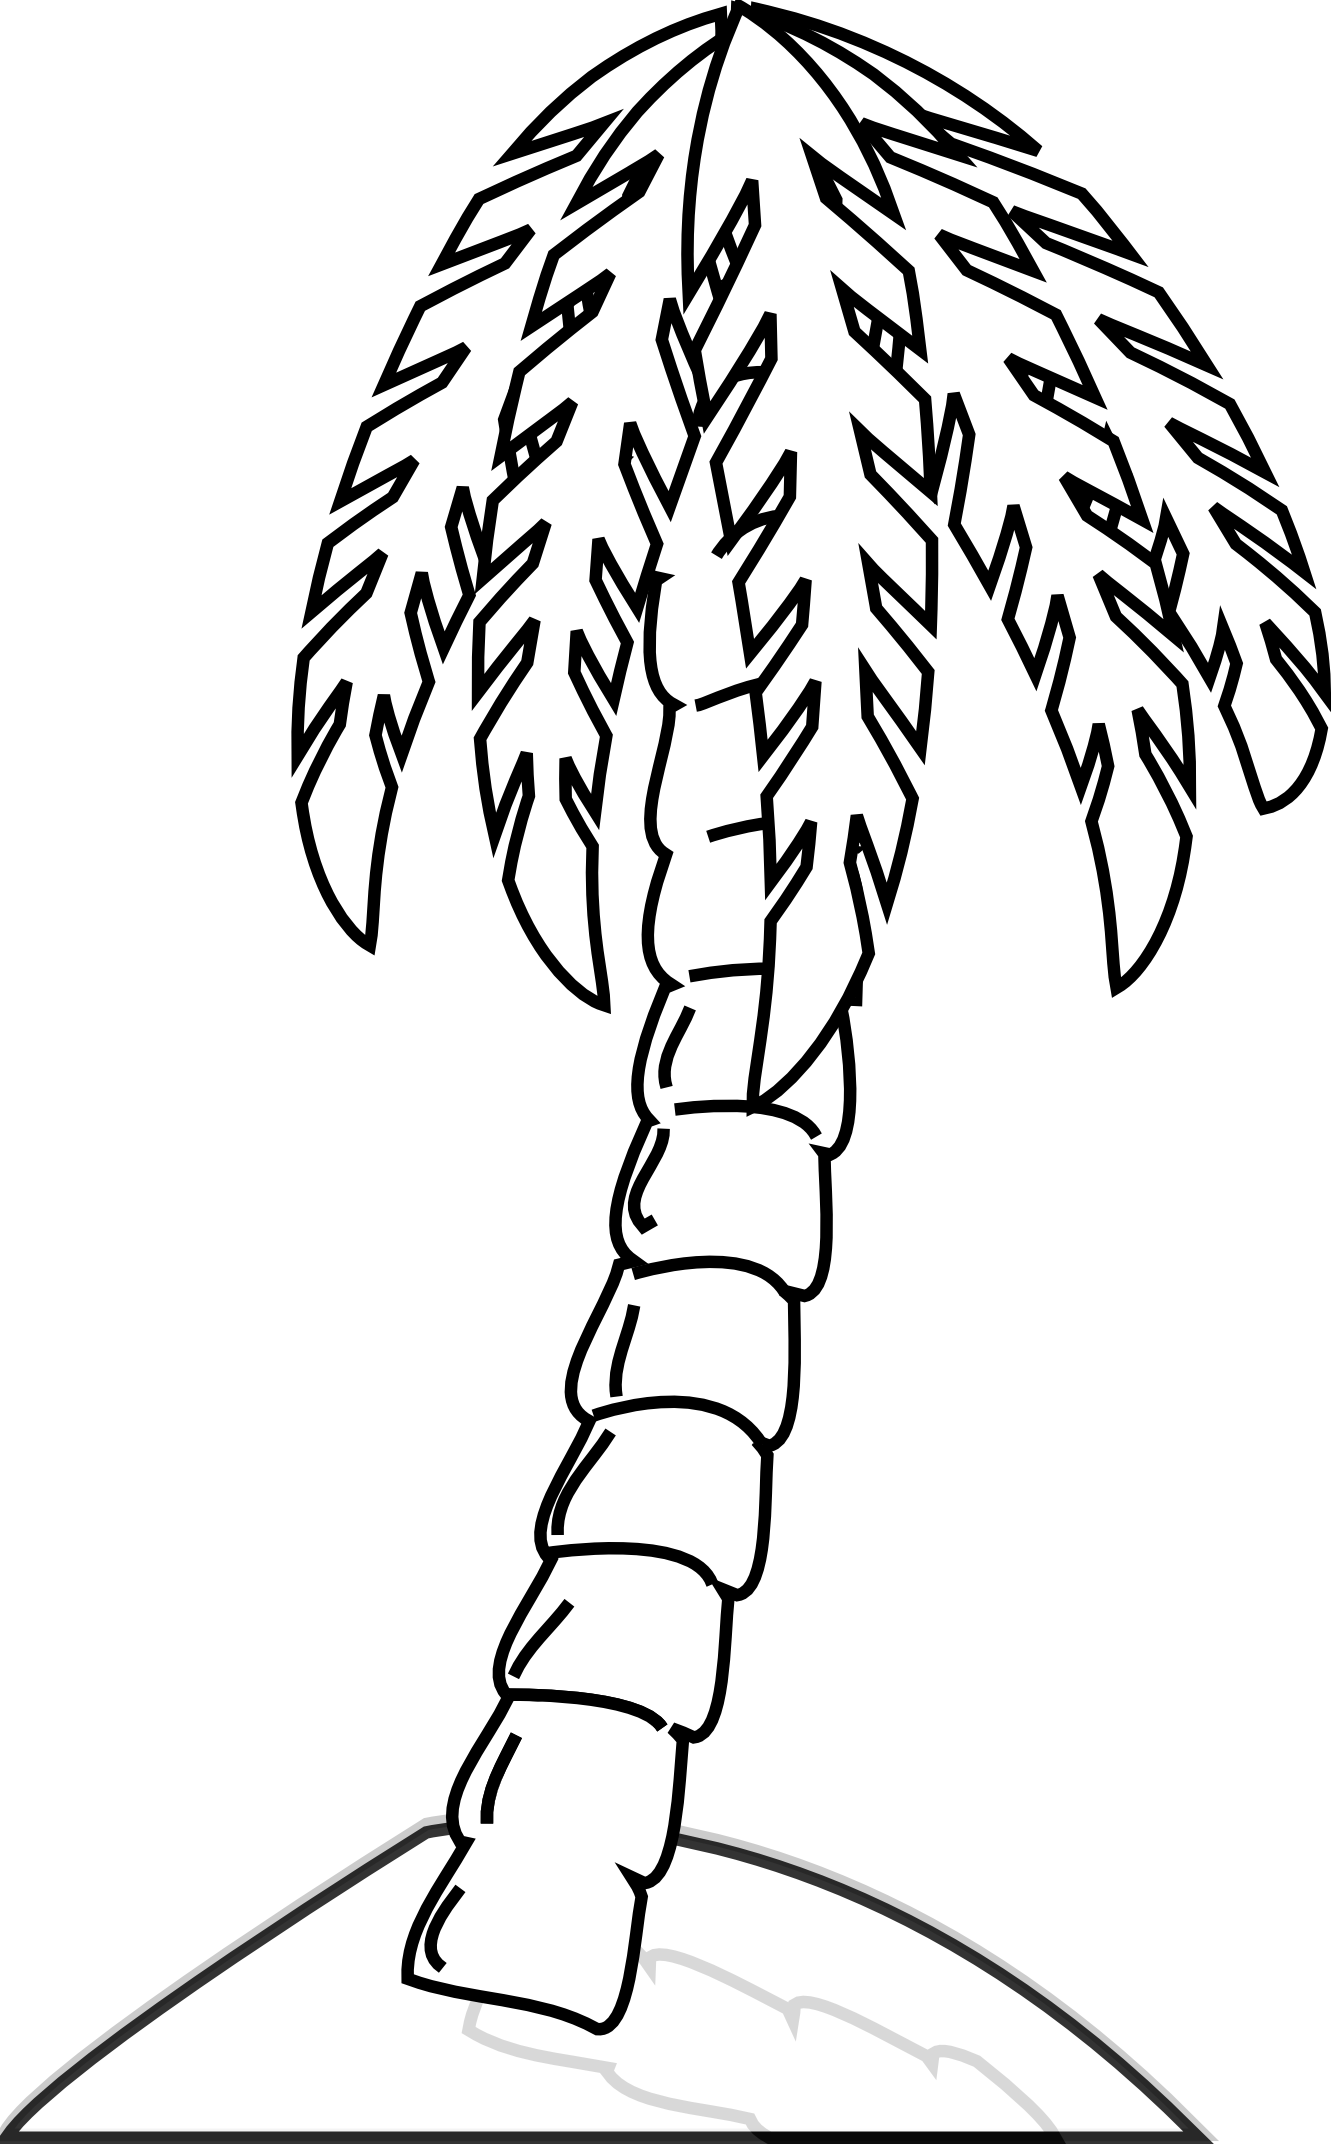 Palm Tree Line Drawing - ClipArt Best